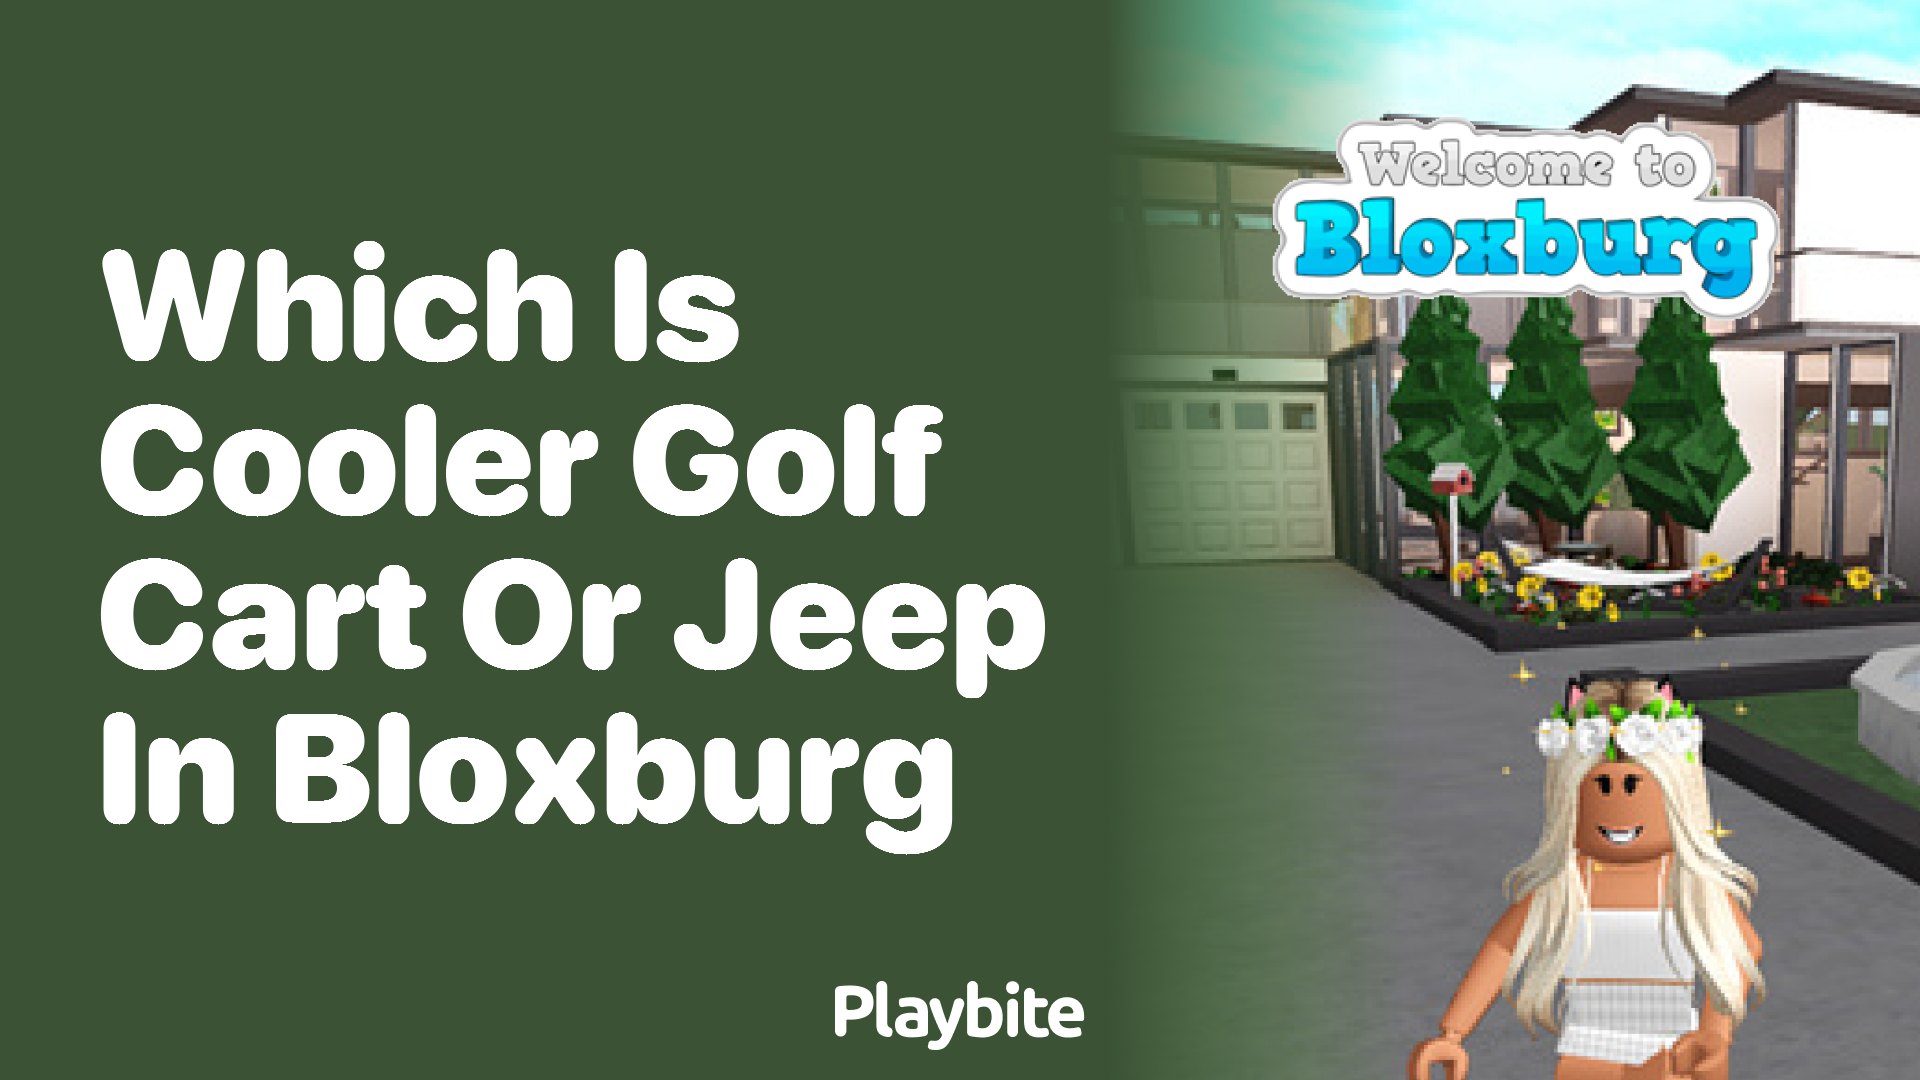 Which Is Cooler in Bloxburg: Golf Cart or Jeep?